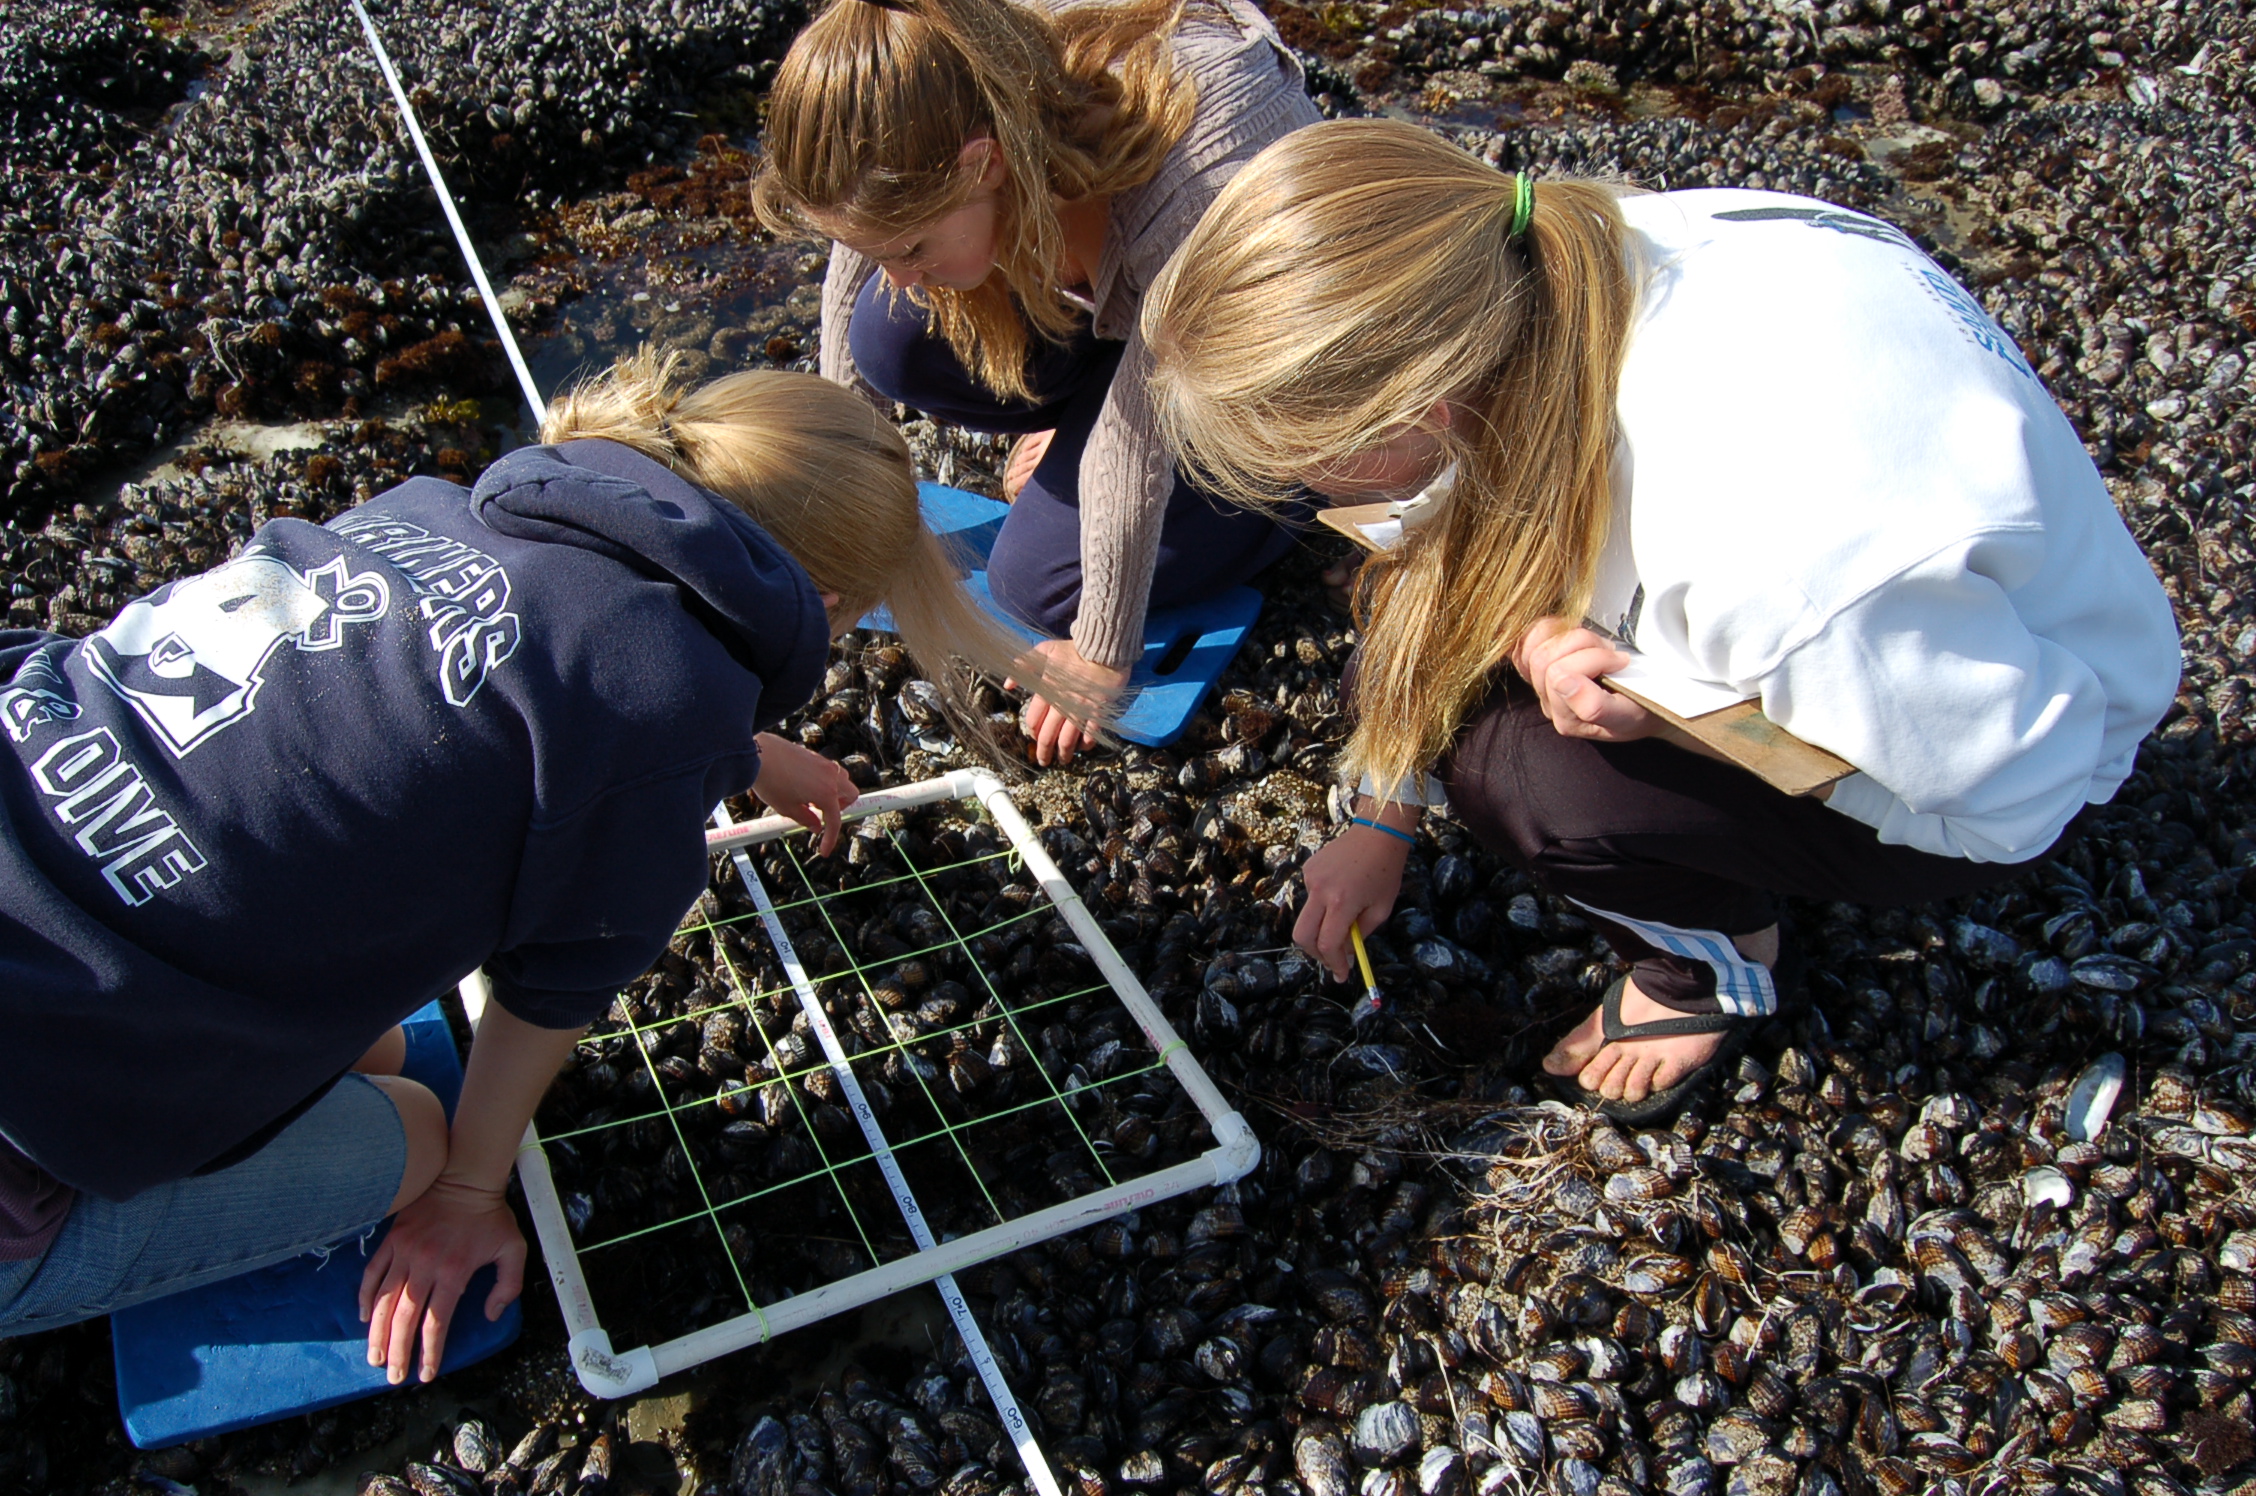 High schoolers crouch over a quadrat (a square with a grid in it) filled with mussels in an intertidal zone.